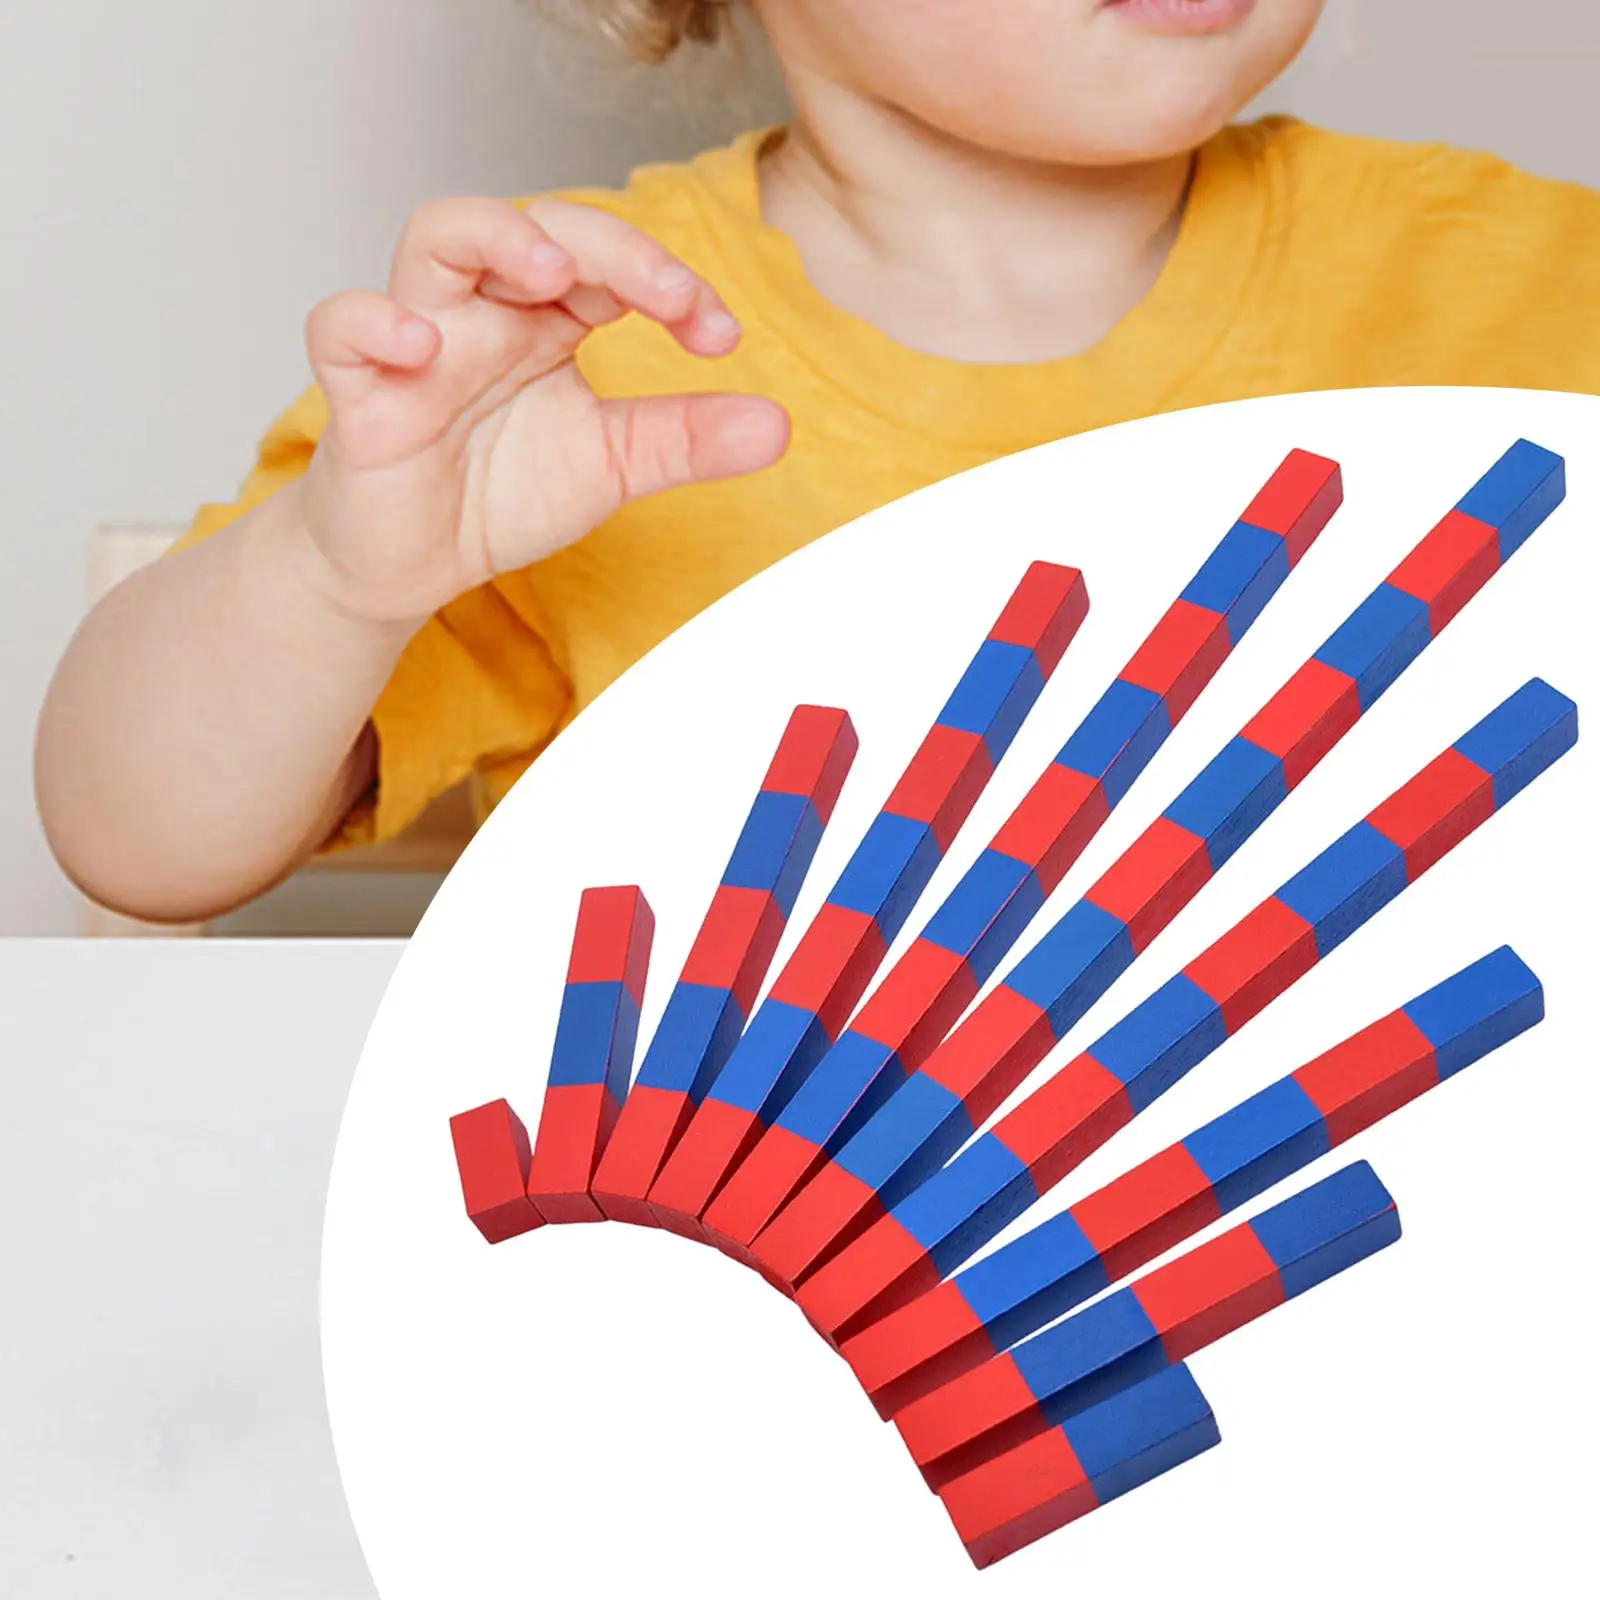 Math Montessori Numerical Rods Count from 1 to 10 Preschool Training Sensorial Materials for Kindergarten Holiday Daycare Unisex